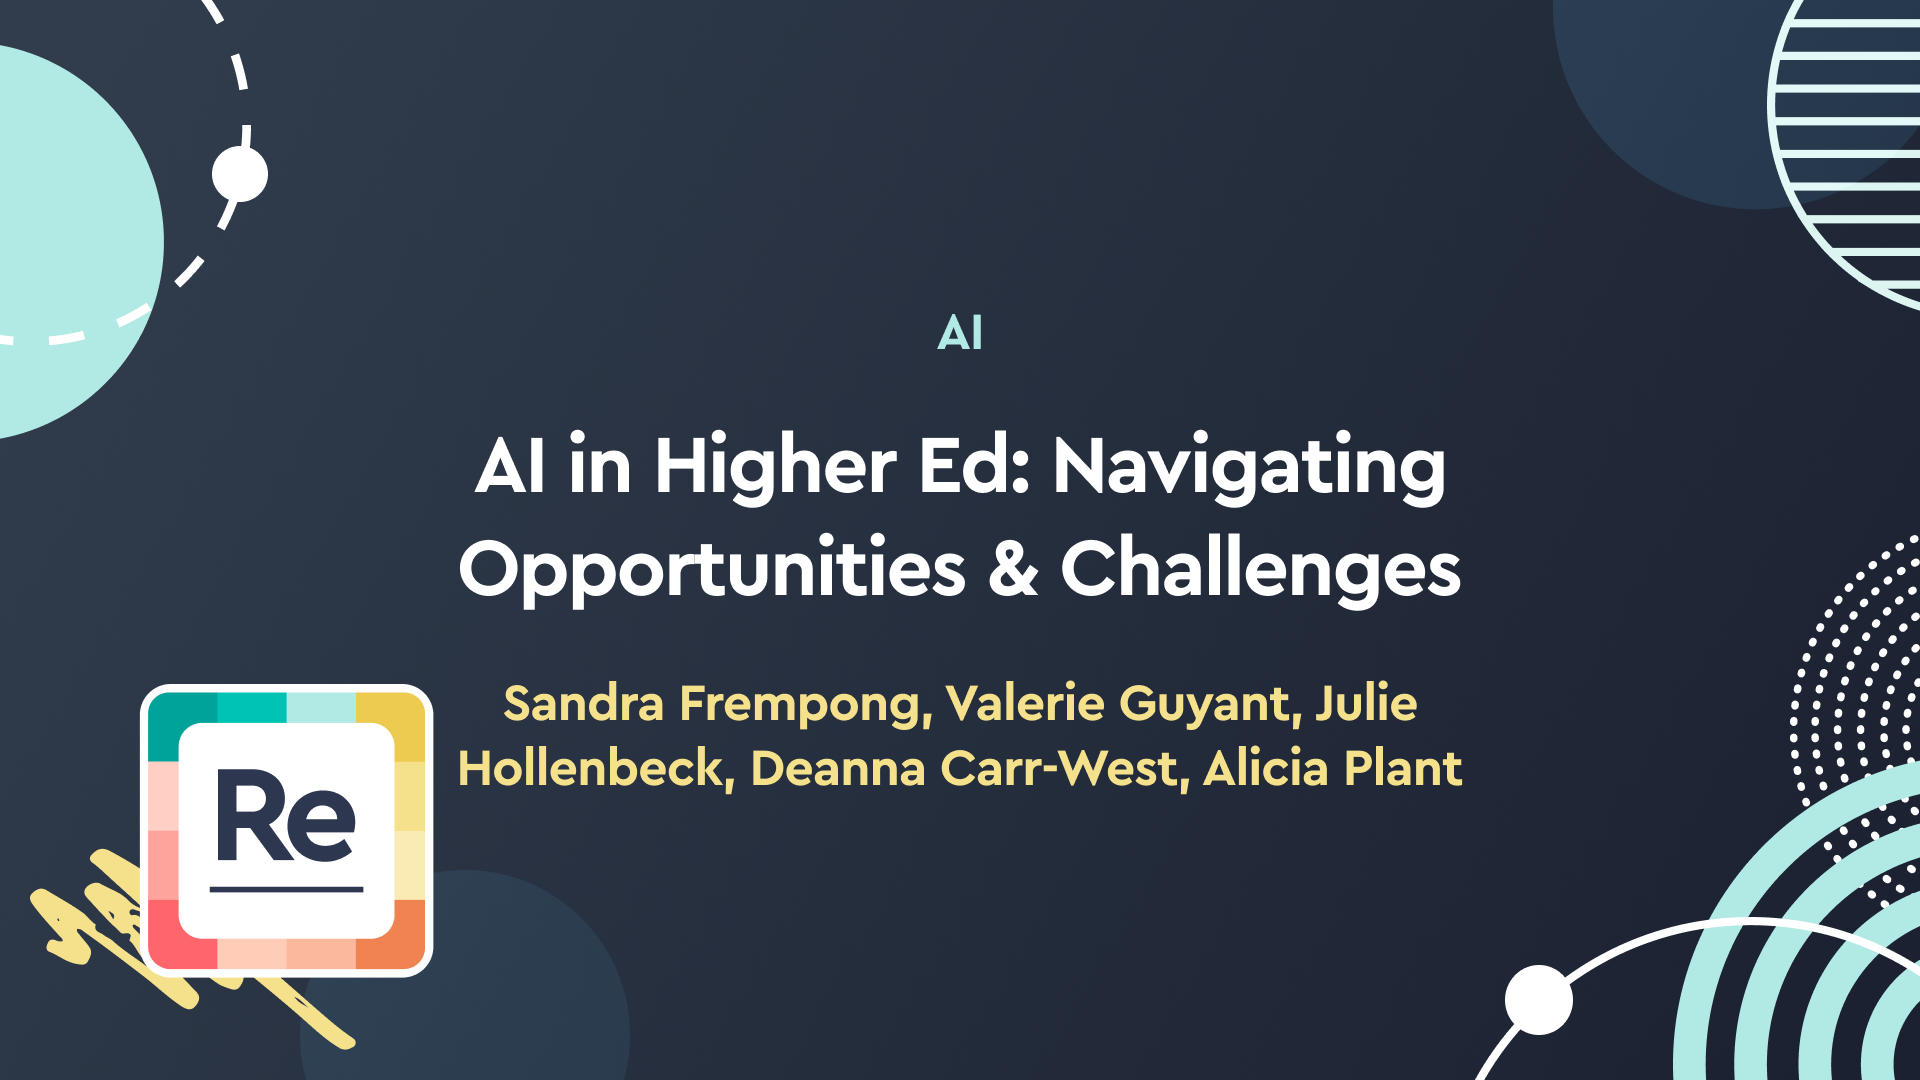 AI in Higher Ed: Navigating Opportunities & Challenges